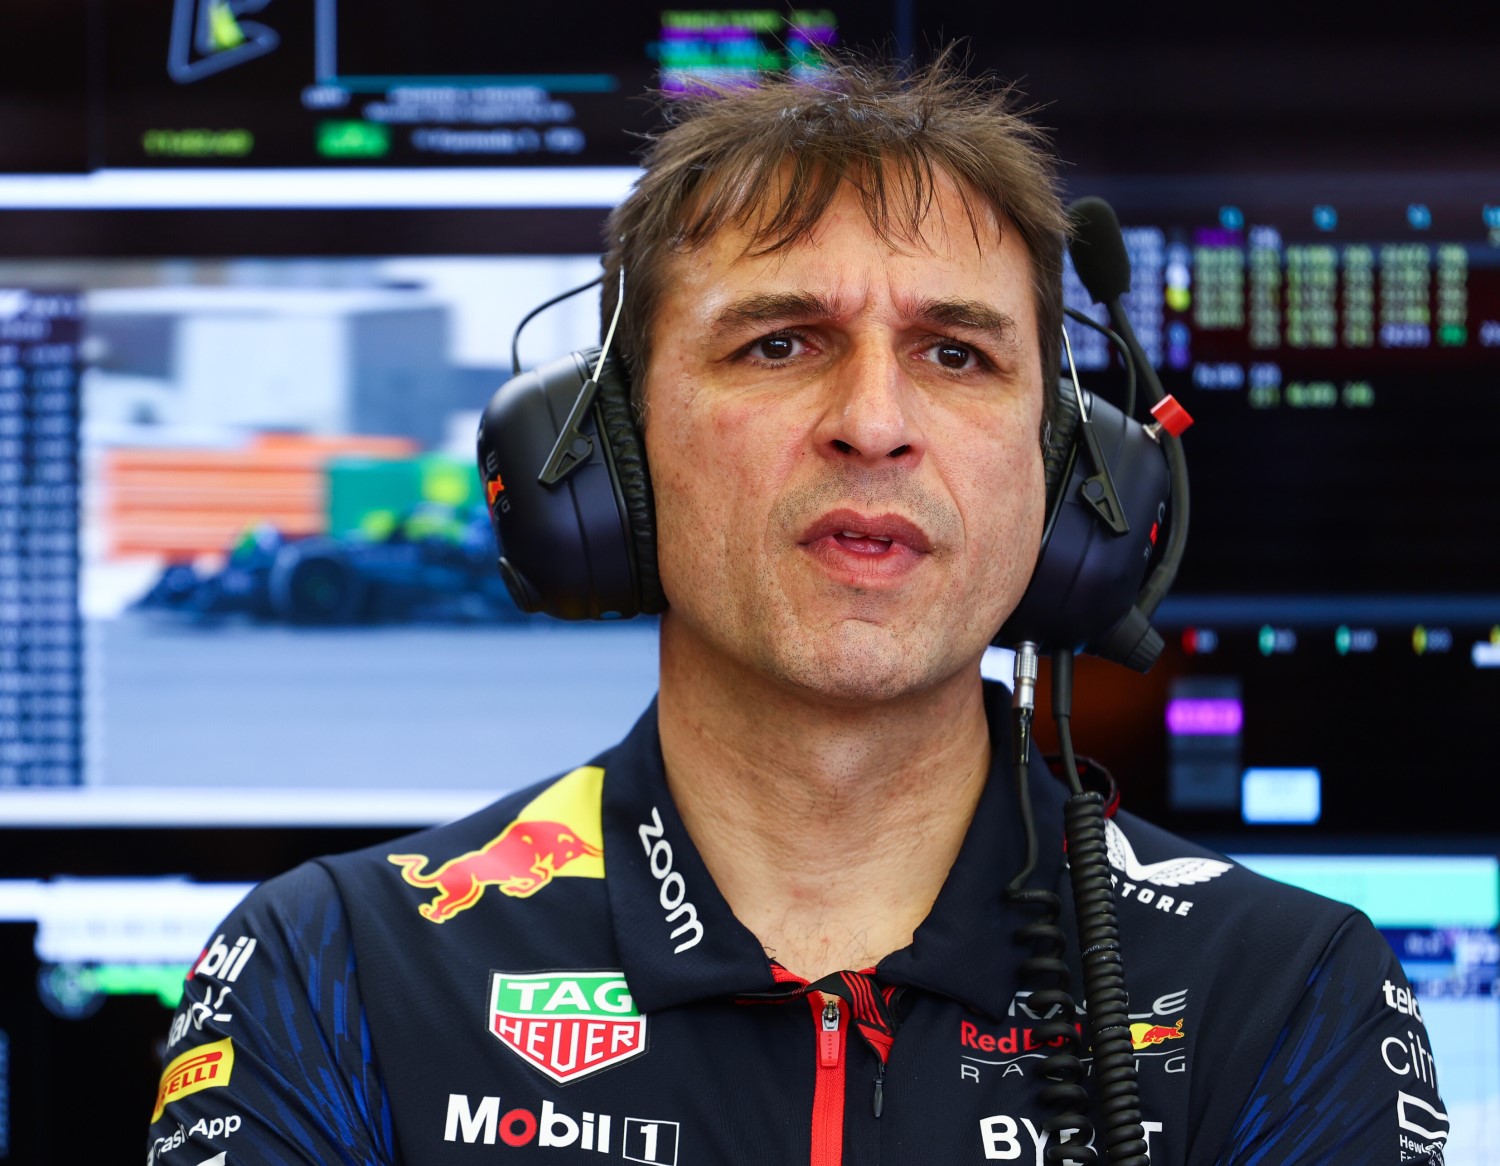 Pierre Wache, Chief Engineer of Performance Engineering at Red Bull Racing looks on during day one of F1 Testing at Bahrain International Circuit on February 23, 2023 in Bahrain, Bahrain. (Photo by Mark Thompson/Getty Images) // Getty Images / Red Bull Content Pool